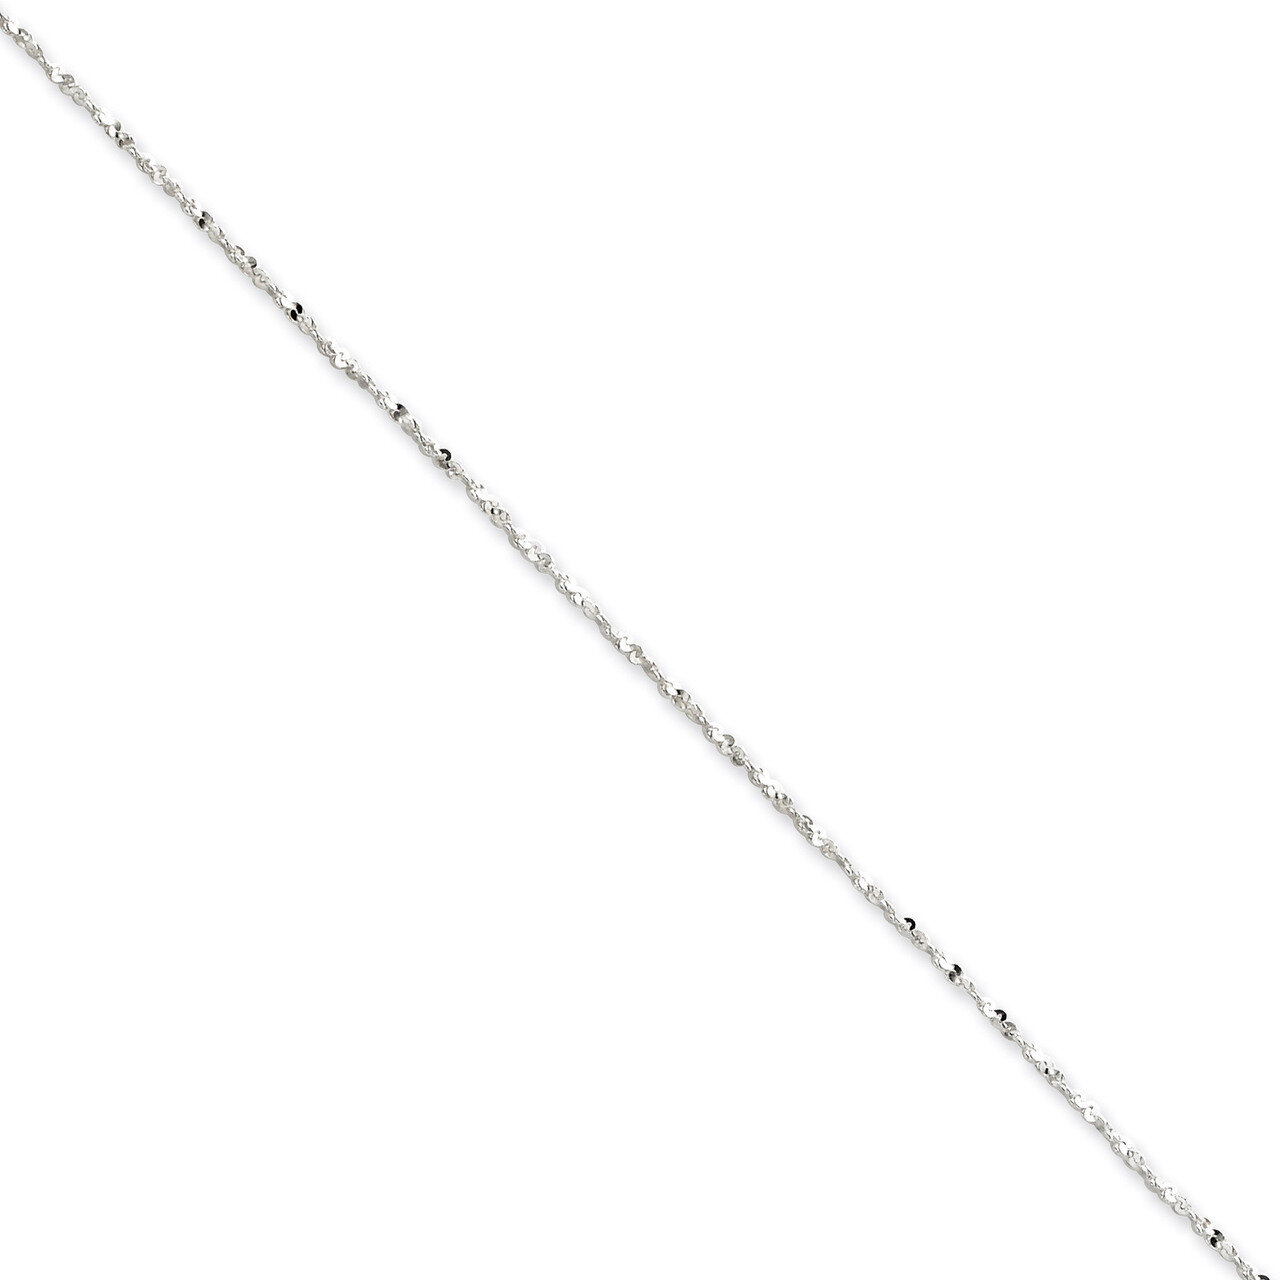 18 Inch 1.2mm Twisted Serpentine Chain Sterling Silver QPEN6-18